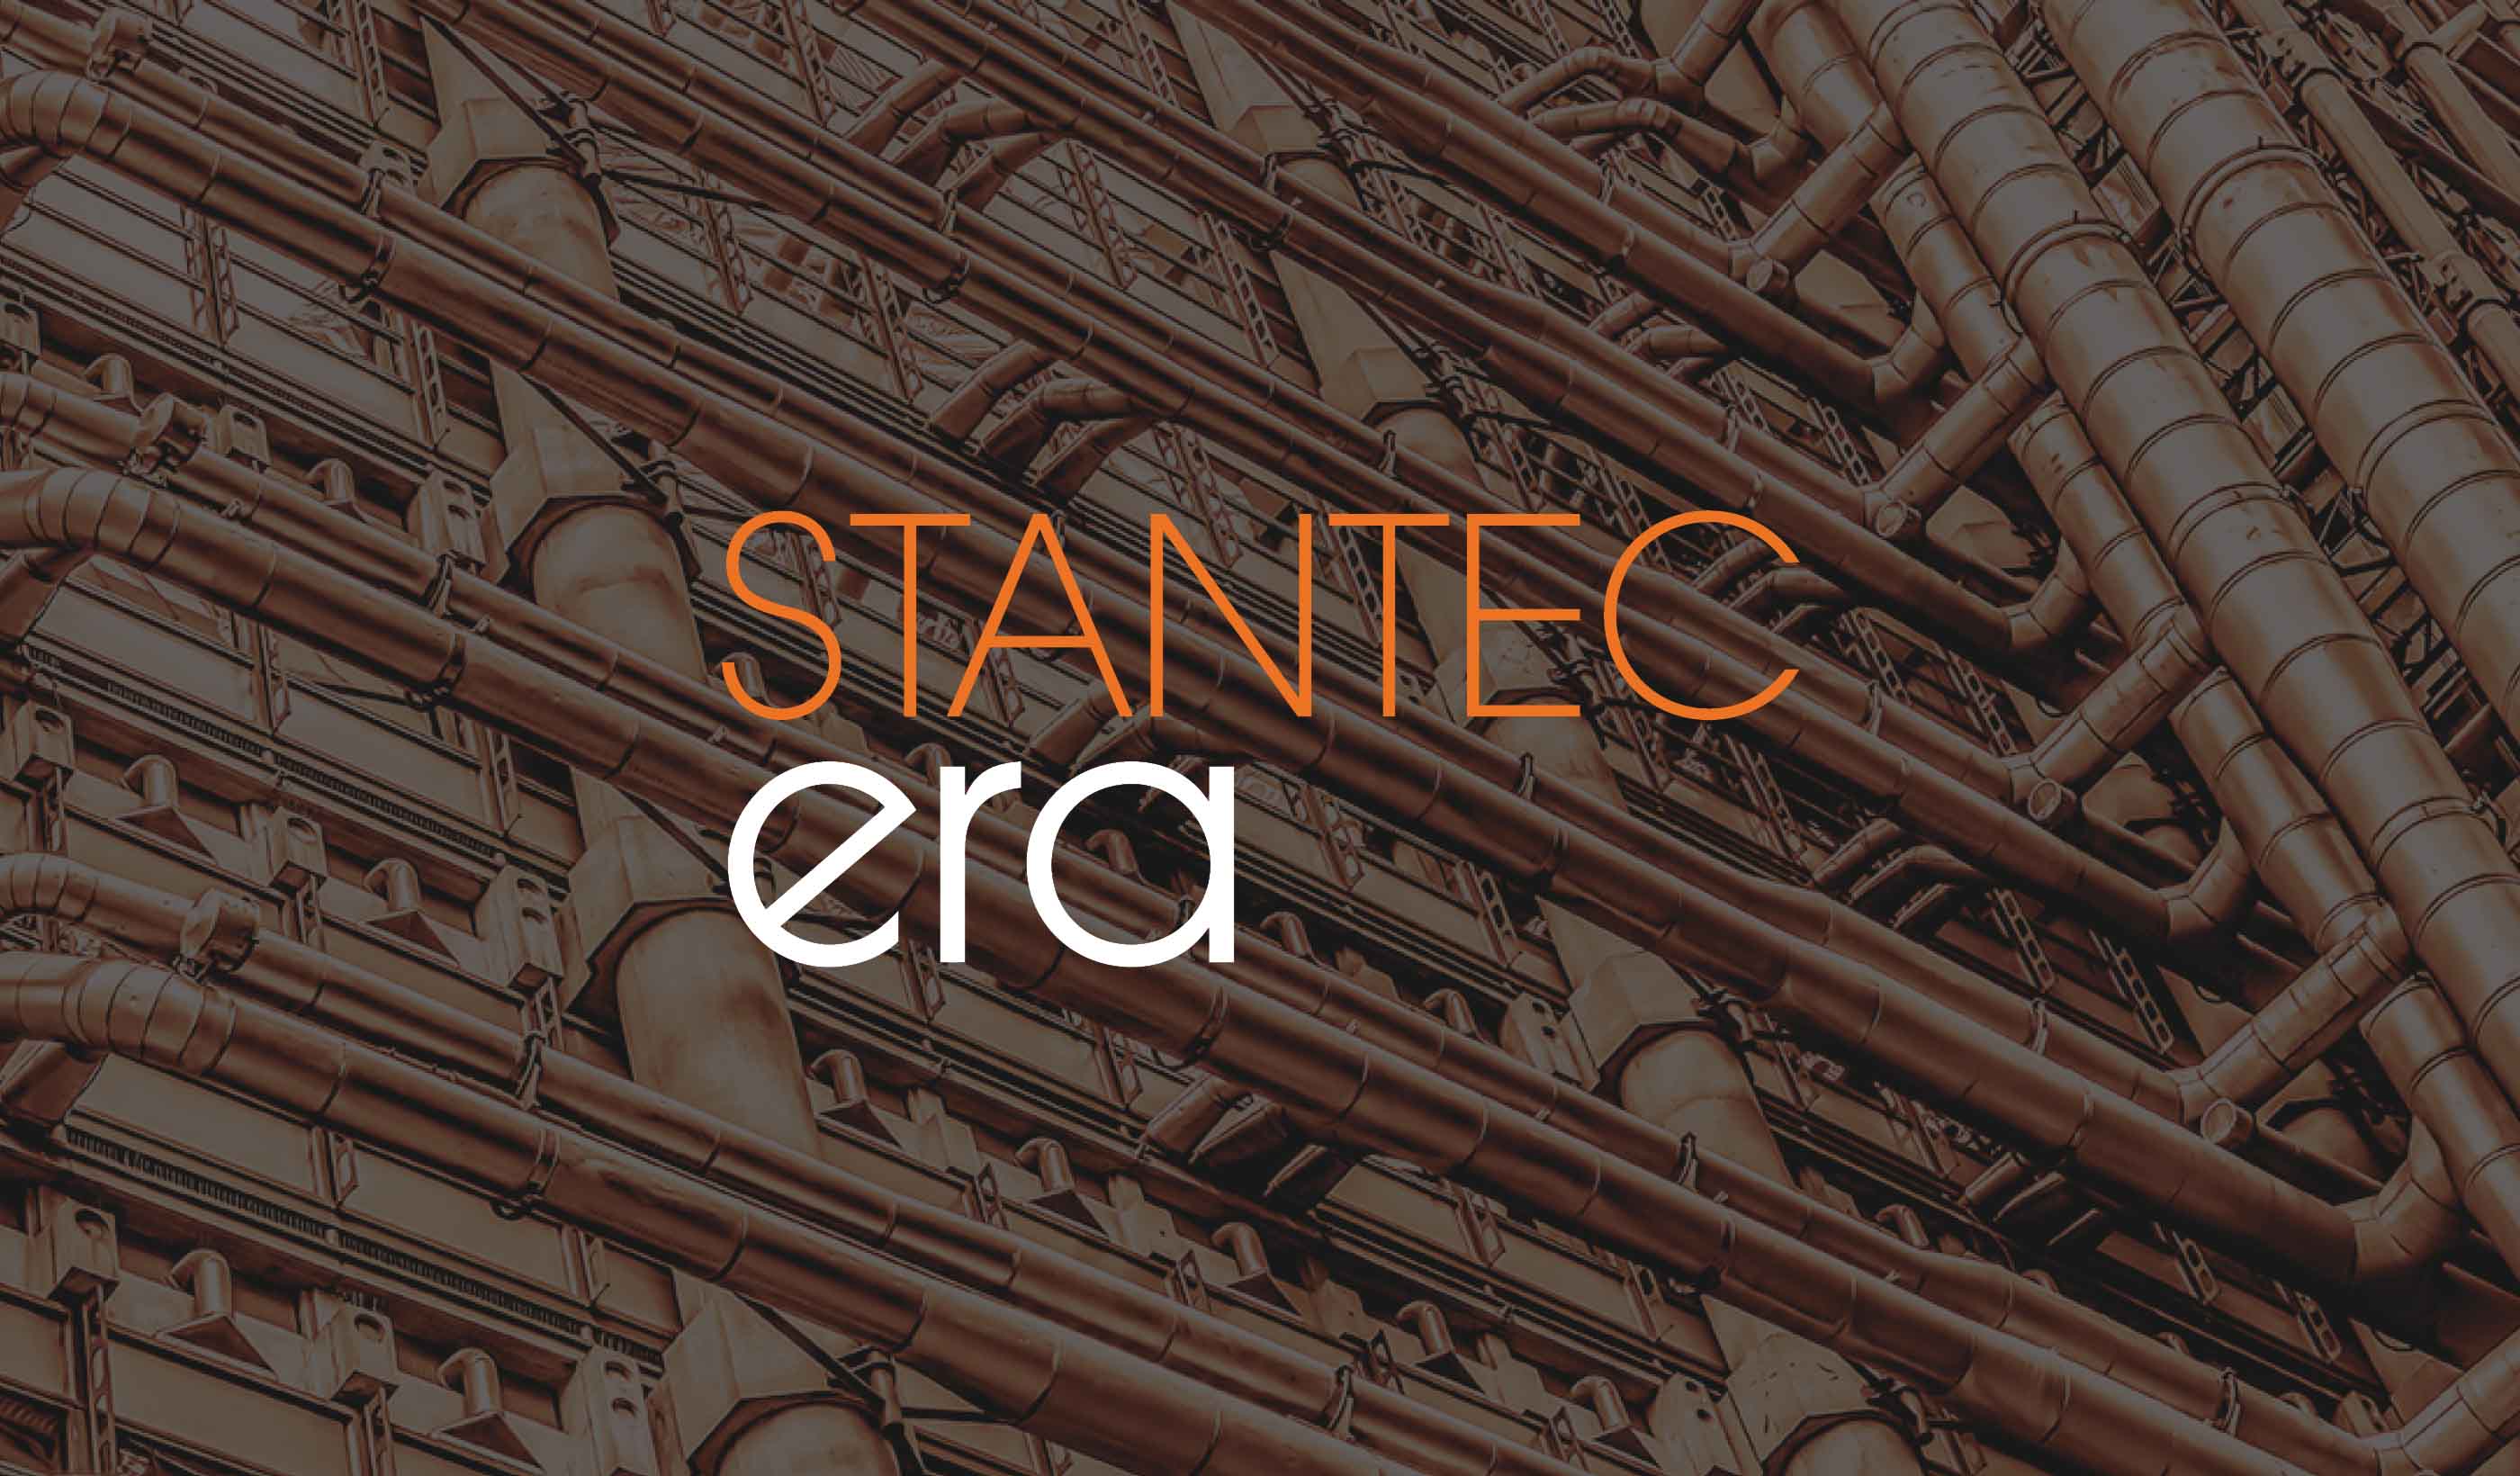 Stantec ERA Issue 03 | The Aging Infrastructure Issue